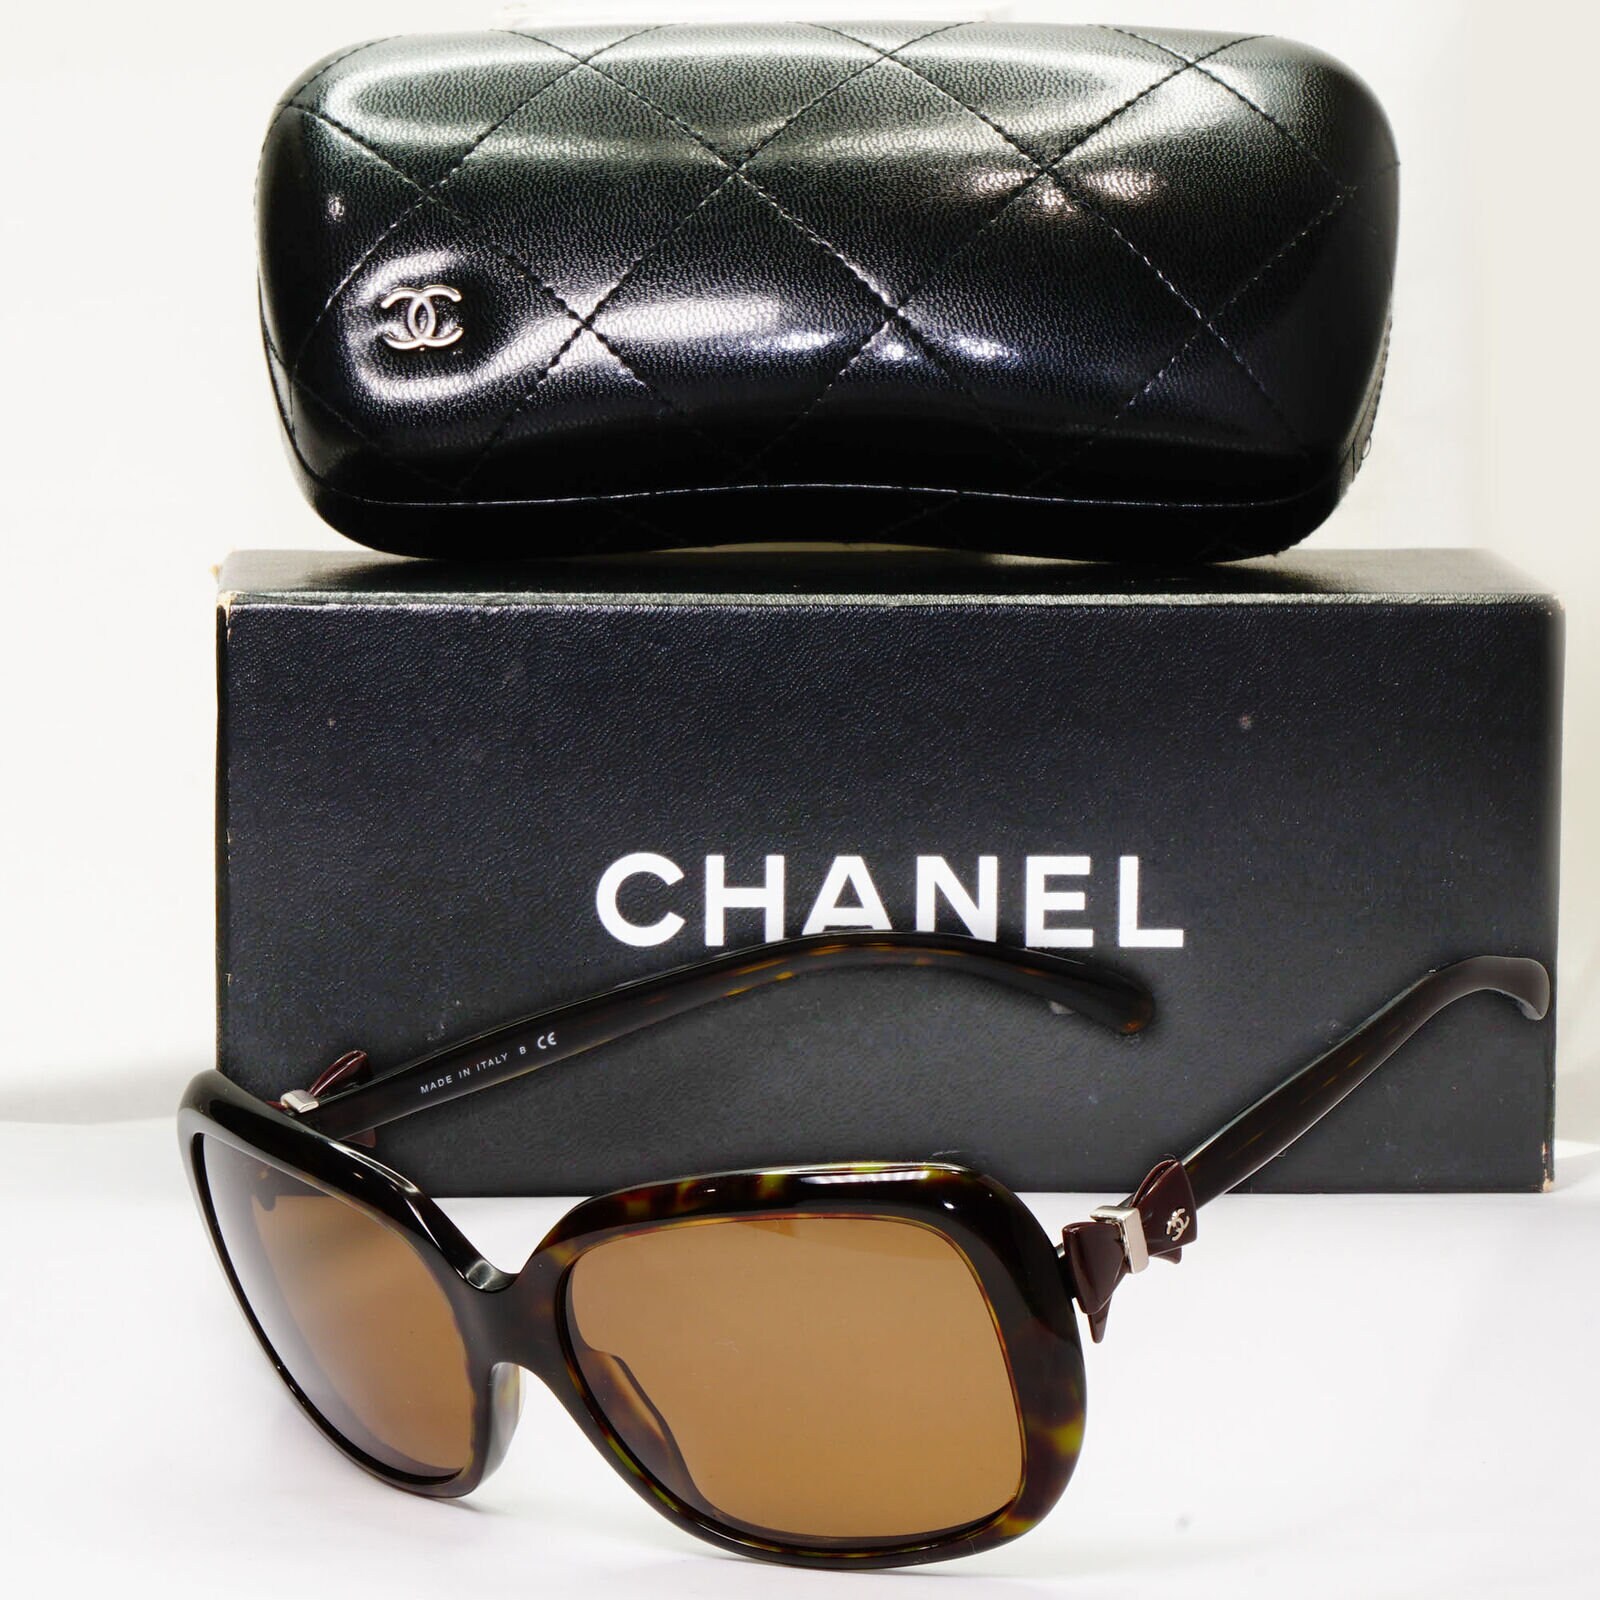 Lusting after: Chanel Sunglasses